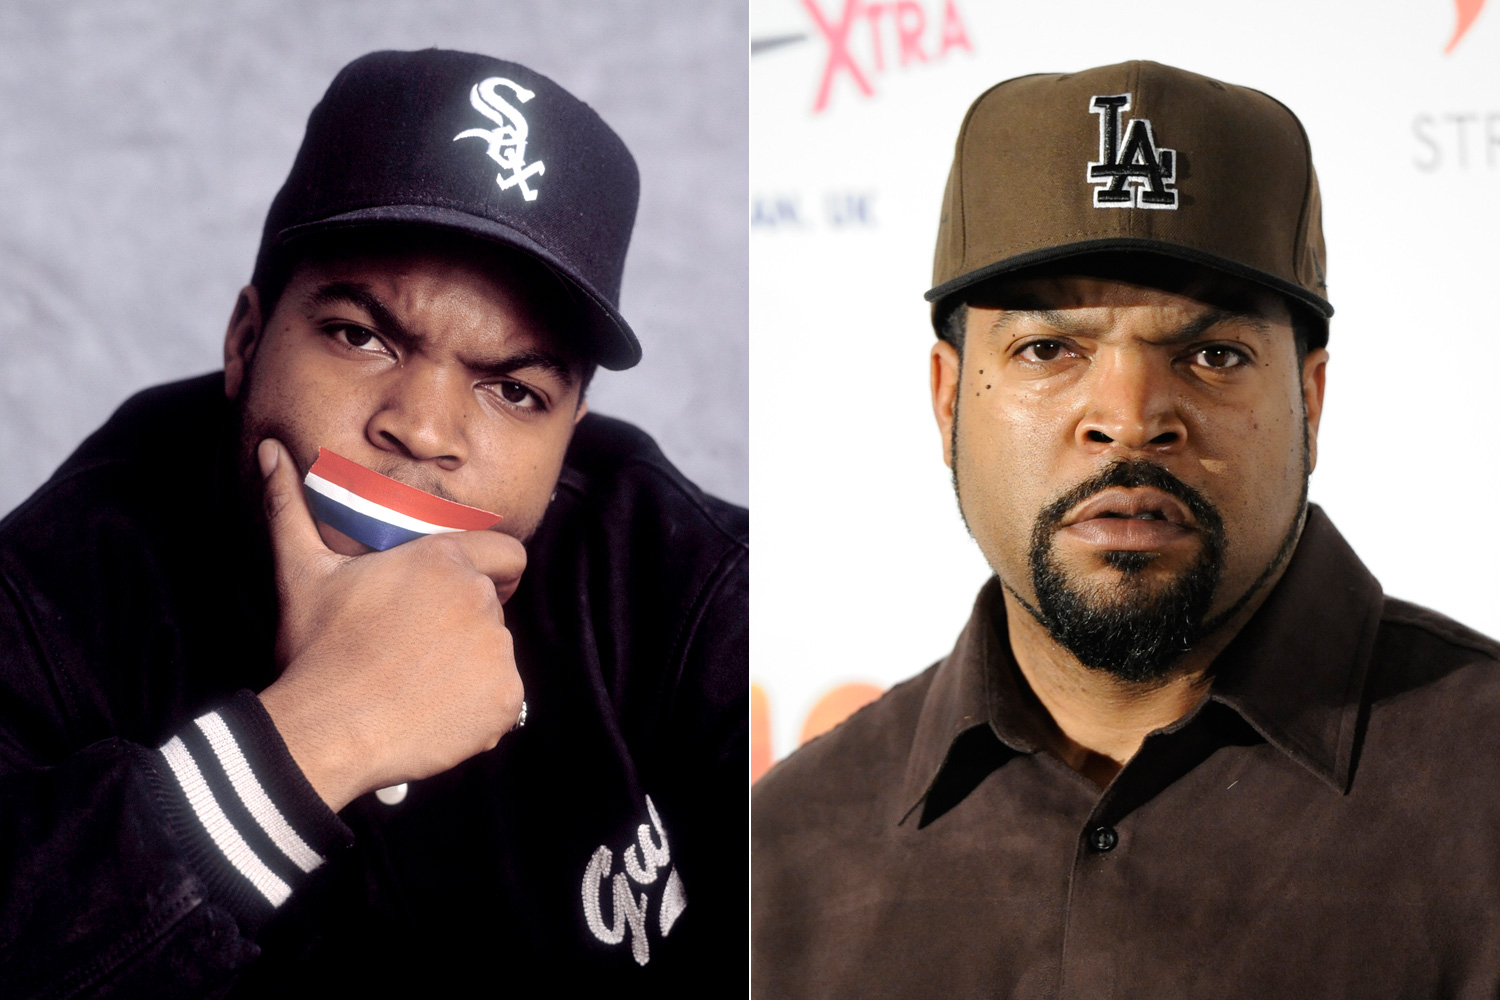 Hard as it might be to believe, anyone born after 1980 likely considers Cube (O'Shea Jackson) an actor first and a rapper second. He's released several solo albums since N.W.A. disbanded, but none matched the commercial or critical success of the group's records. His latest film, '22 Jump Street,' topped the box office when it opened on June 13.